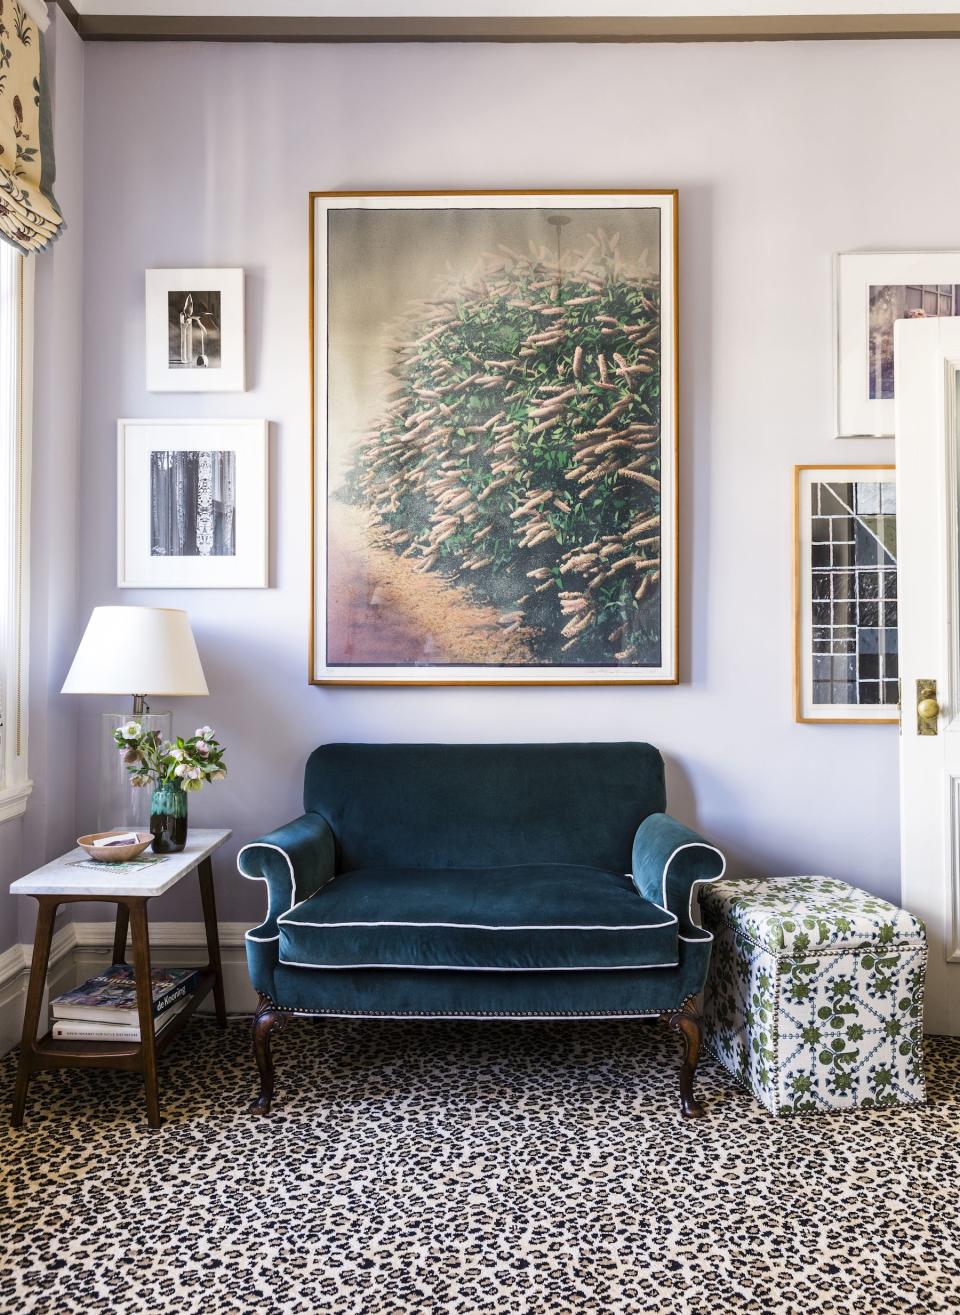 Here's How to Shop for Art Like an Interior Designer